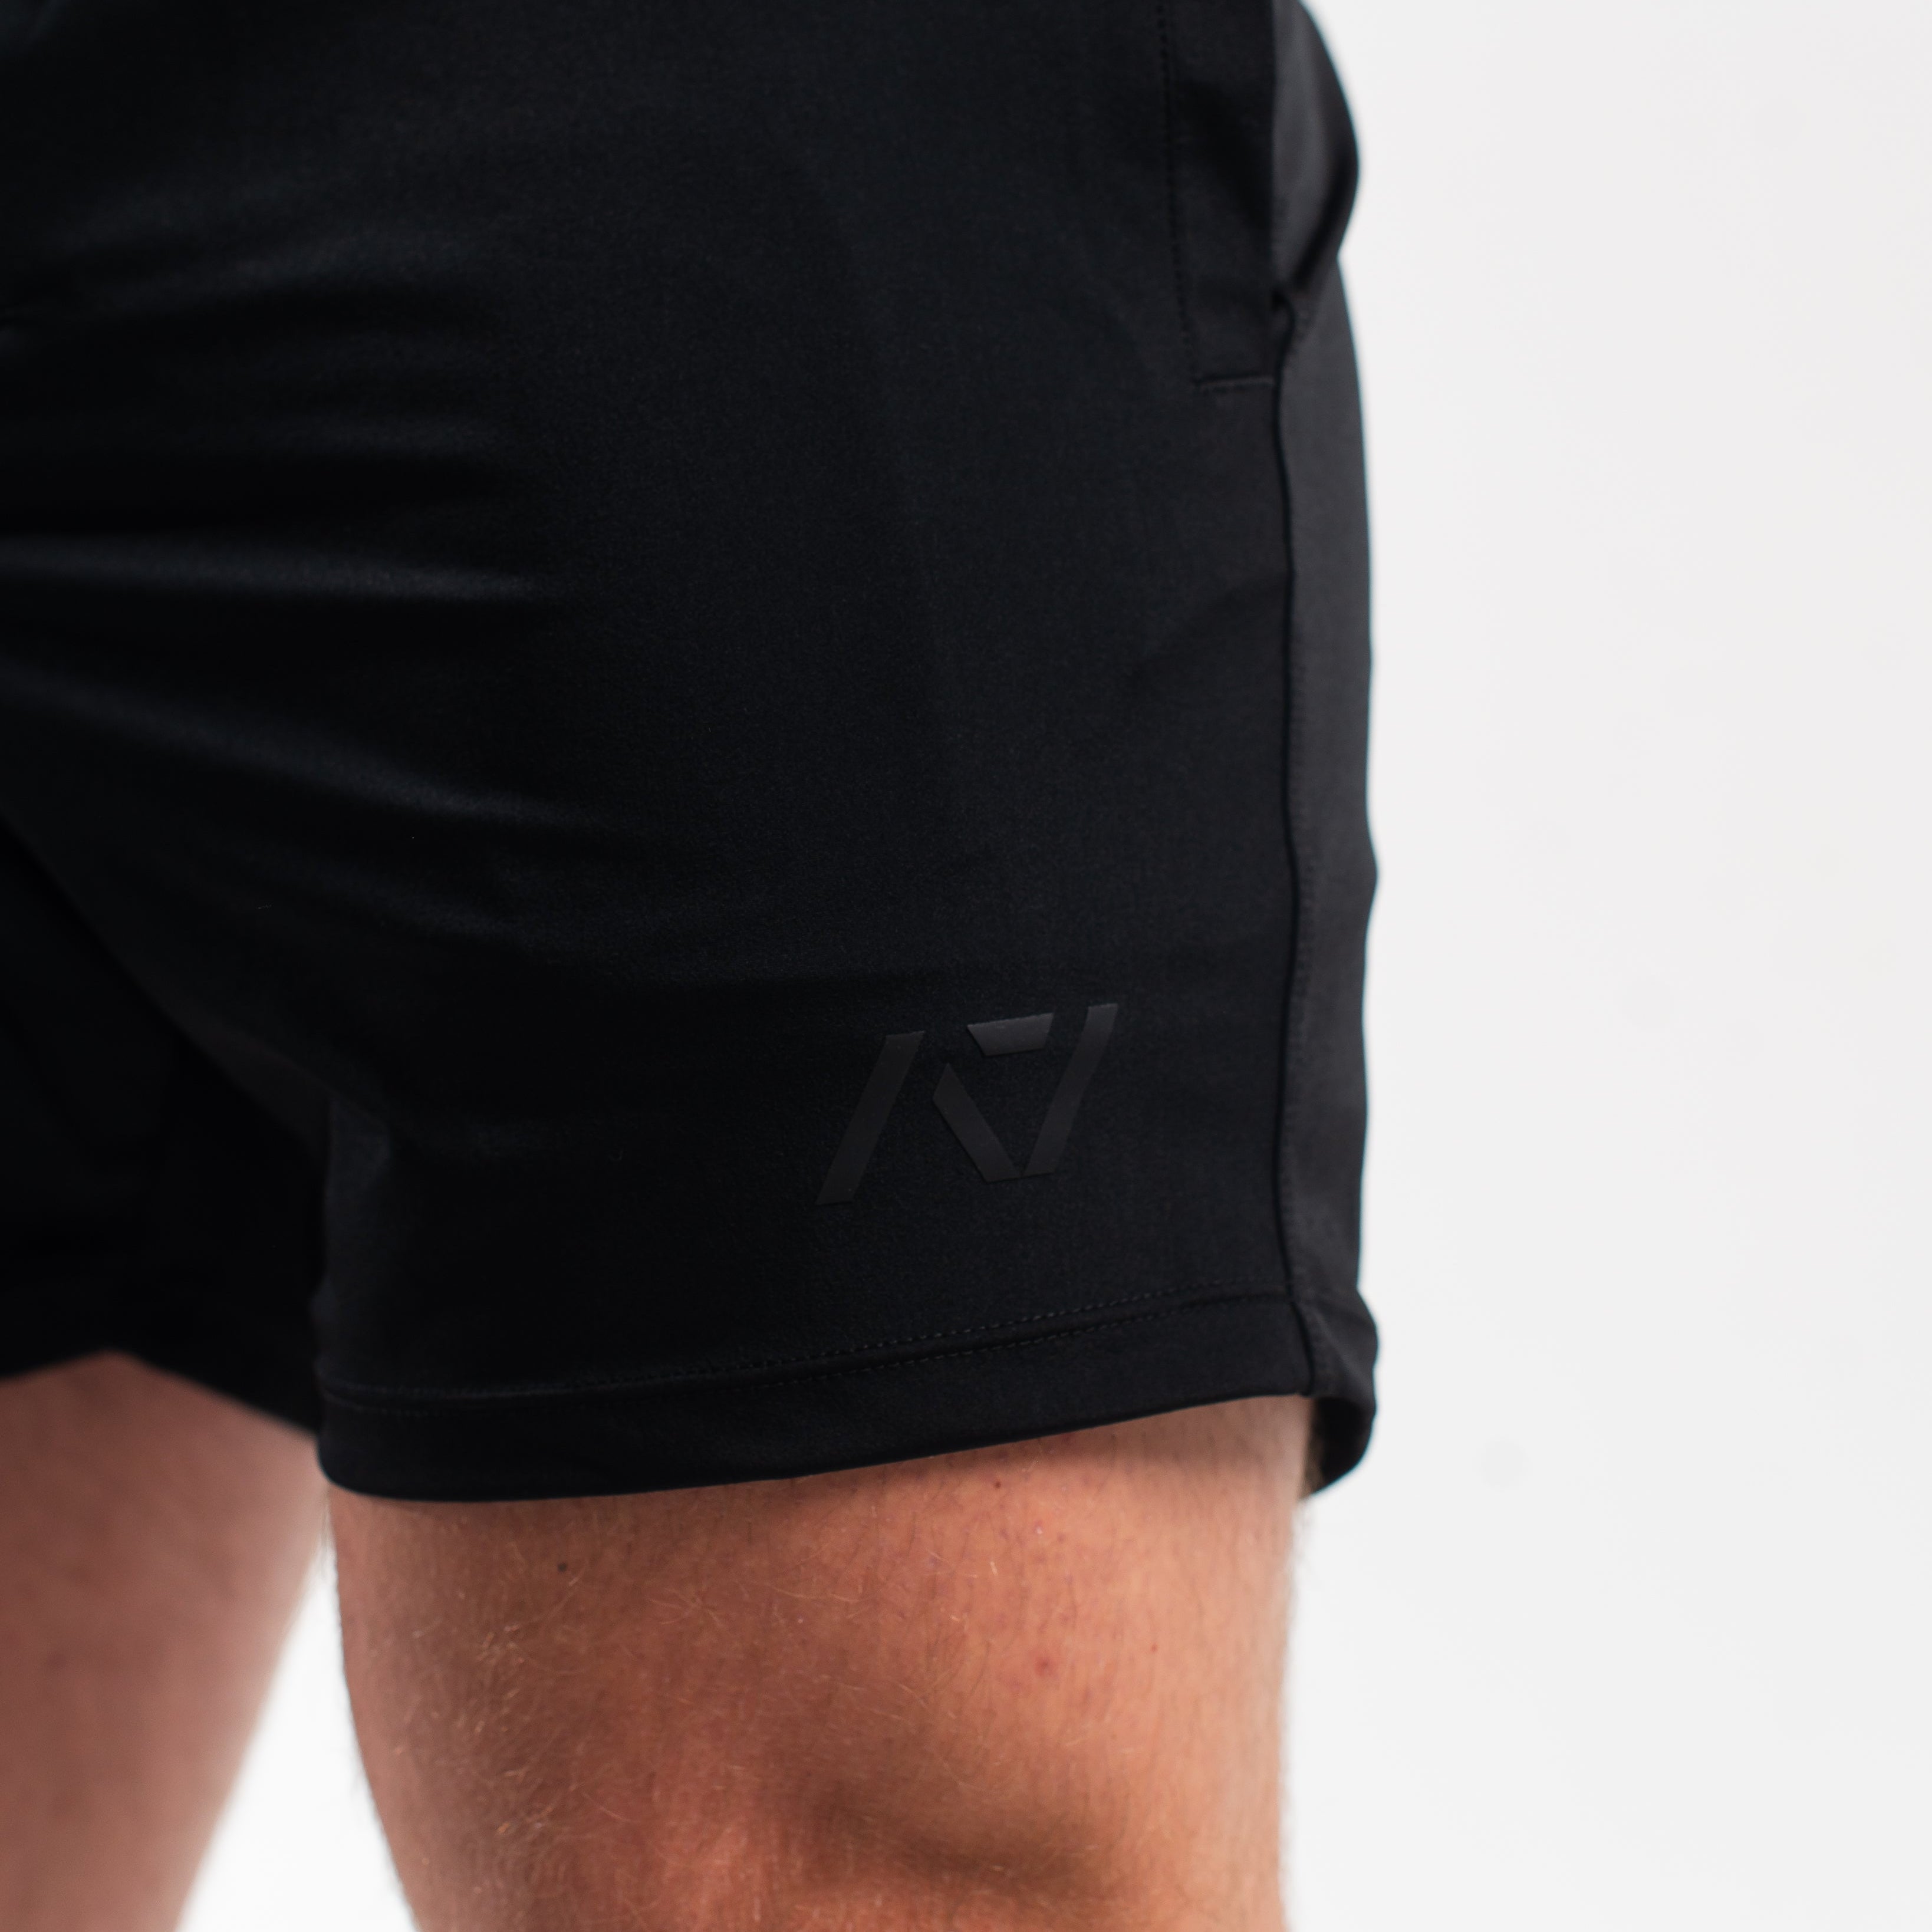 360GO was created to provide the flexibility for all movements in your training while offering comfort. These shorts offer 360 degrees of stretch in all angles and allow you to remain comfortable without limiting any movement in both training and life environments. Designed with a wide drawstring to easily adjust your waist without slipping. Purchase 360GO KWD Squat Shorts from A7 UK. Genouillères powerlifting shipping to France, Spain, Ireland, Germany, Italy, Sweden and EU. 